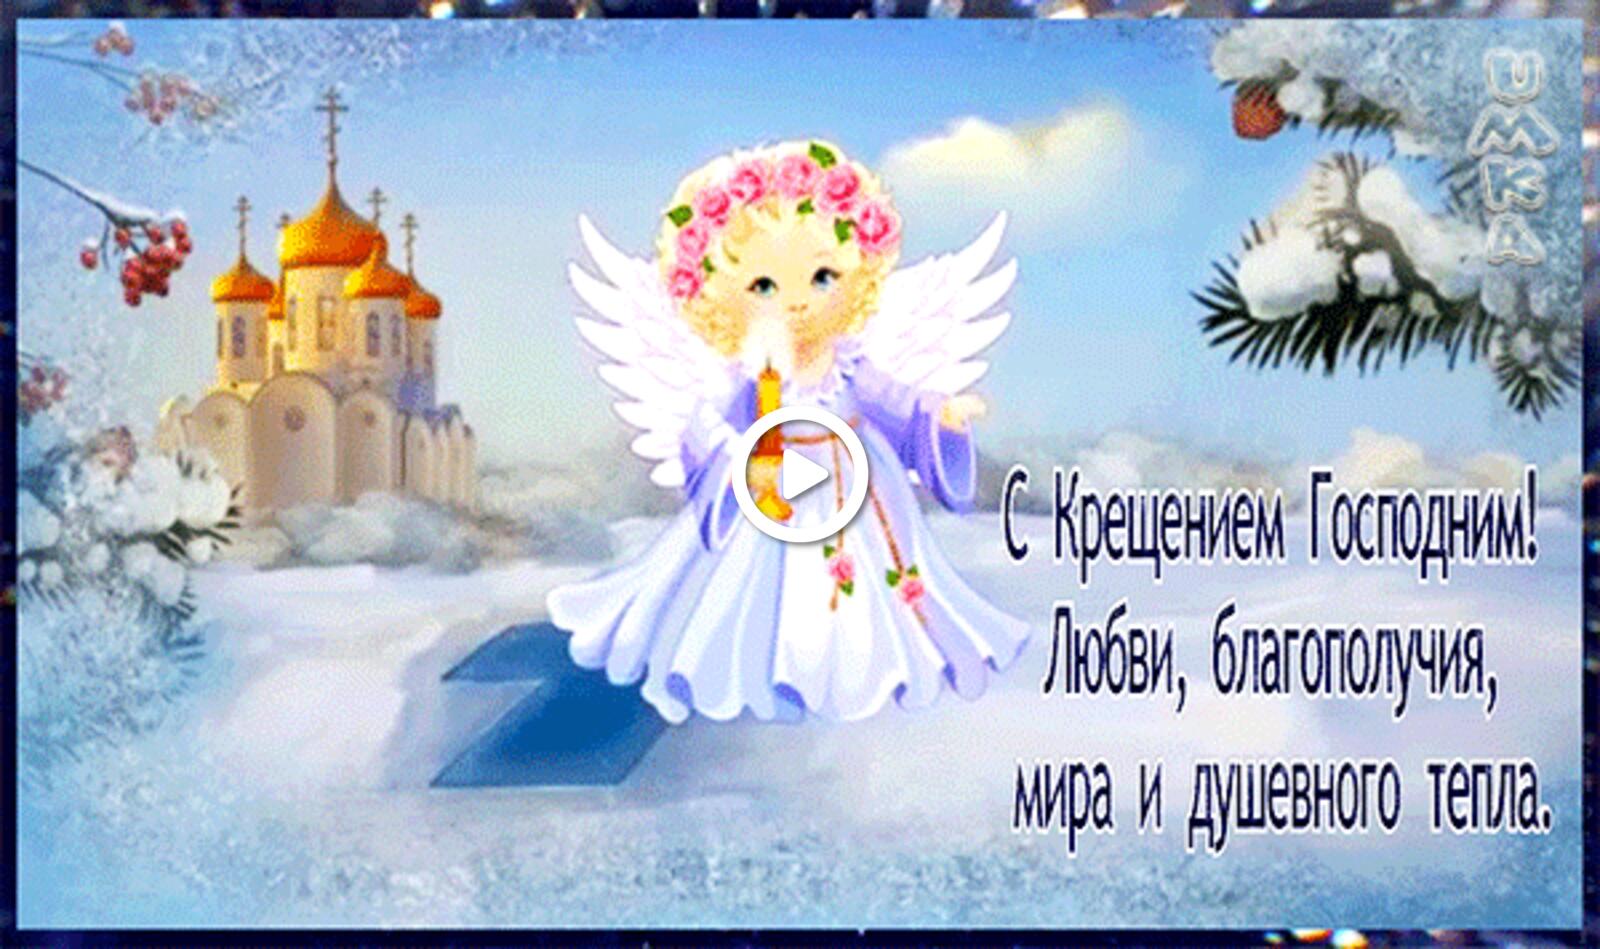 A postcard on the subject of baptism of the lord holidays angel for free